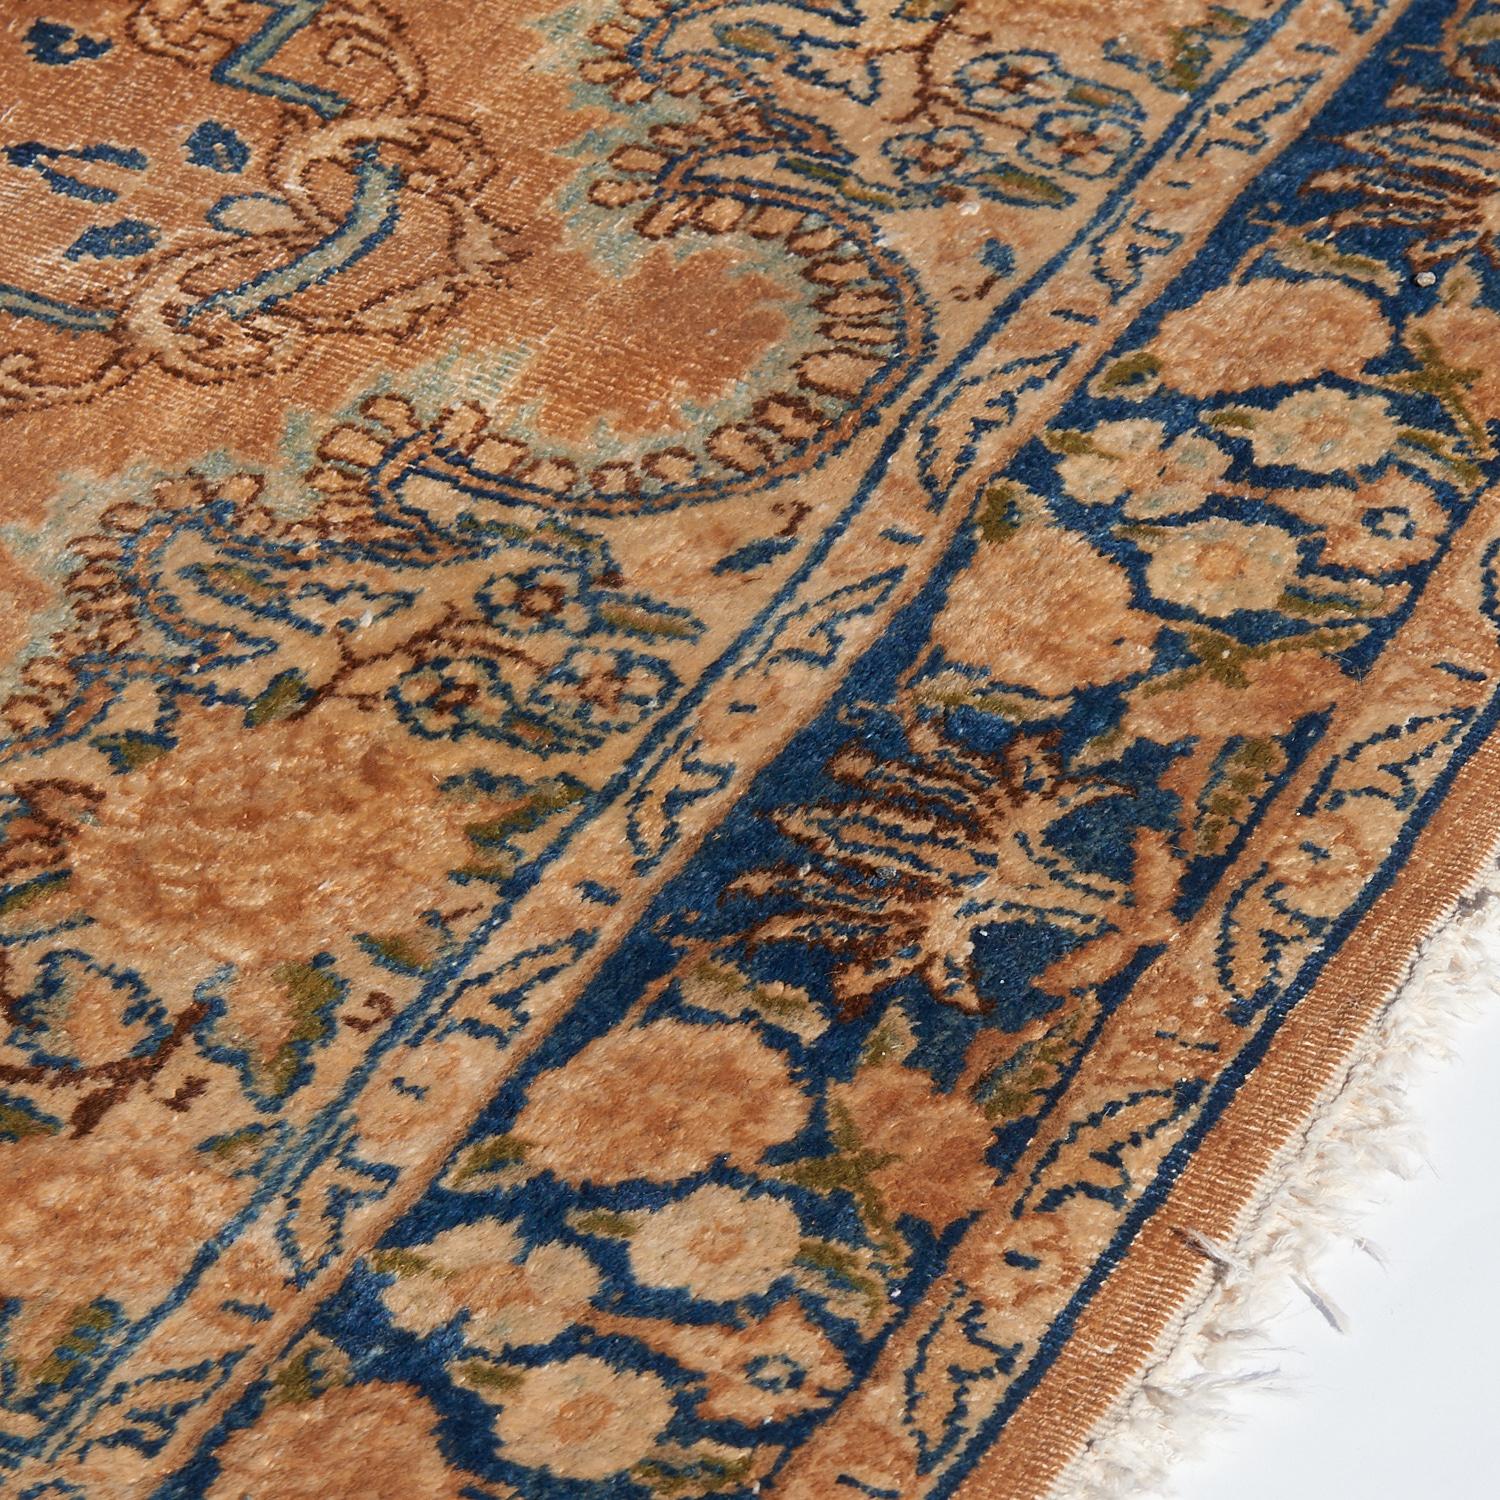 Antique Tabriz-Style Rug in Natural Tones In Good Condition For Sale In Morristown, NJ